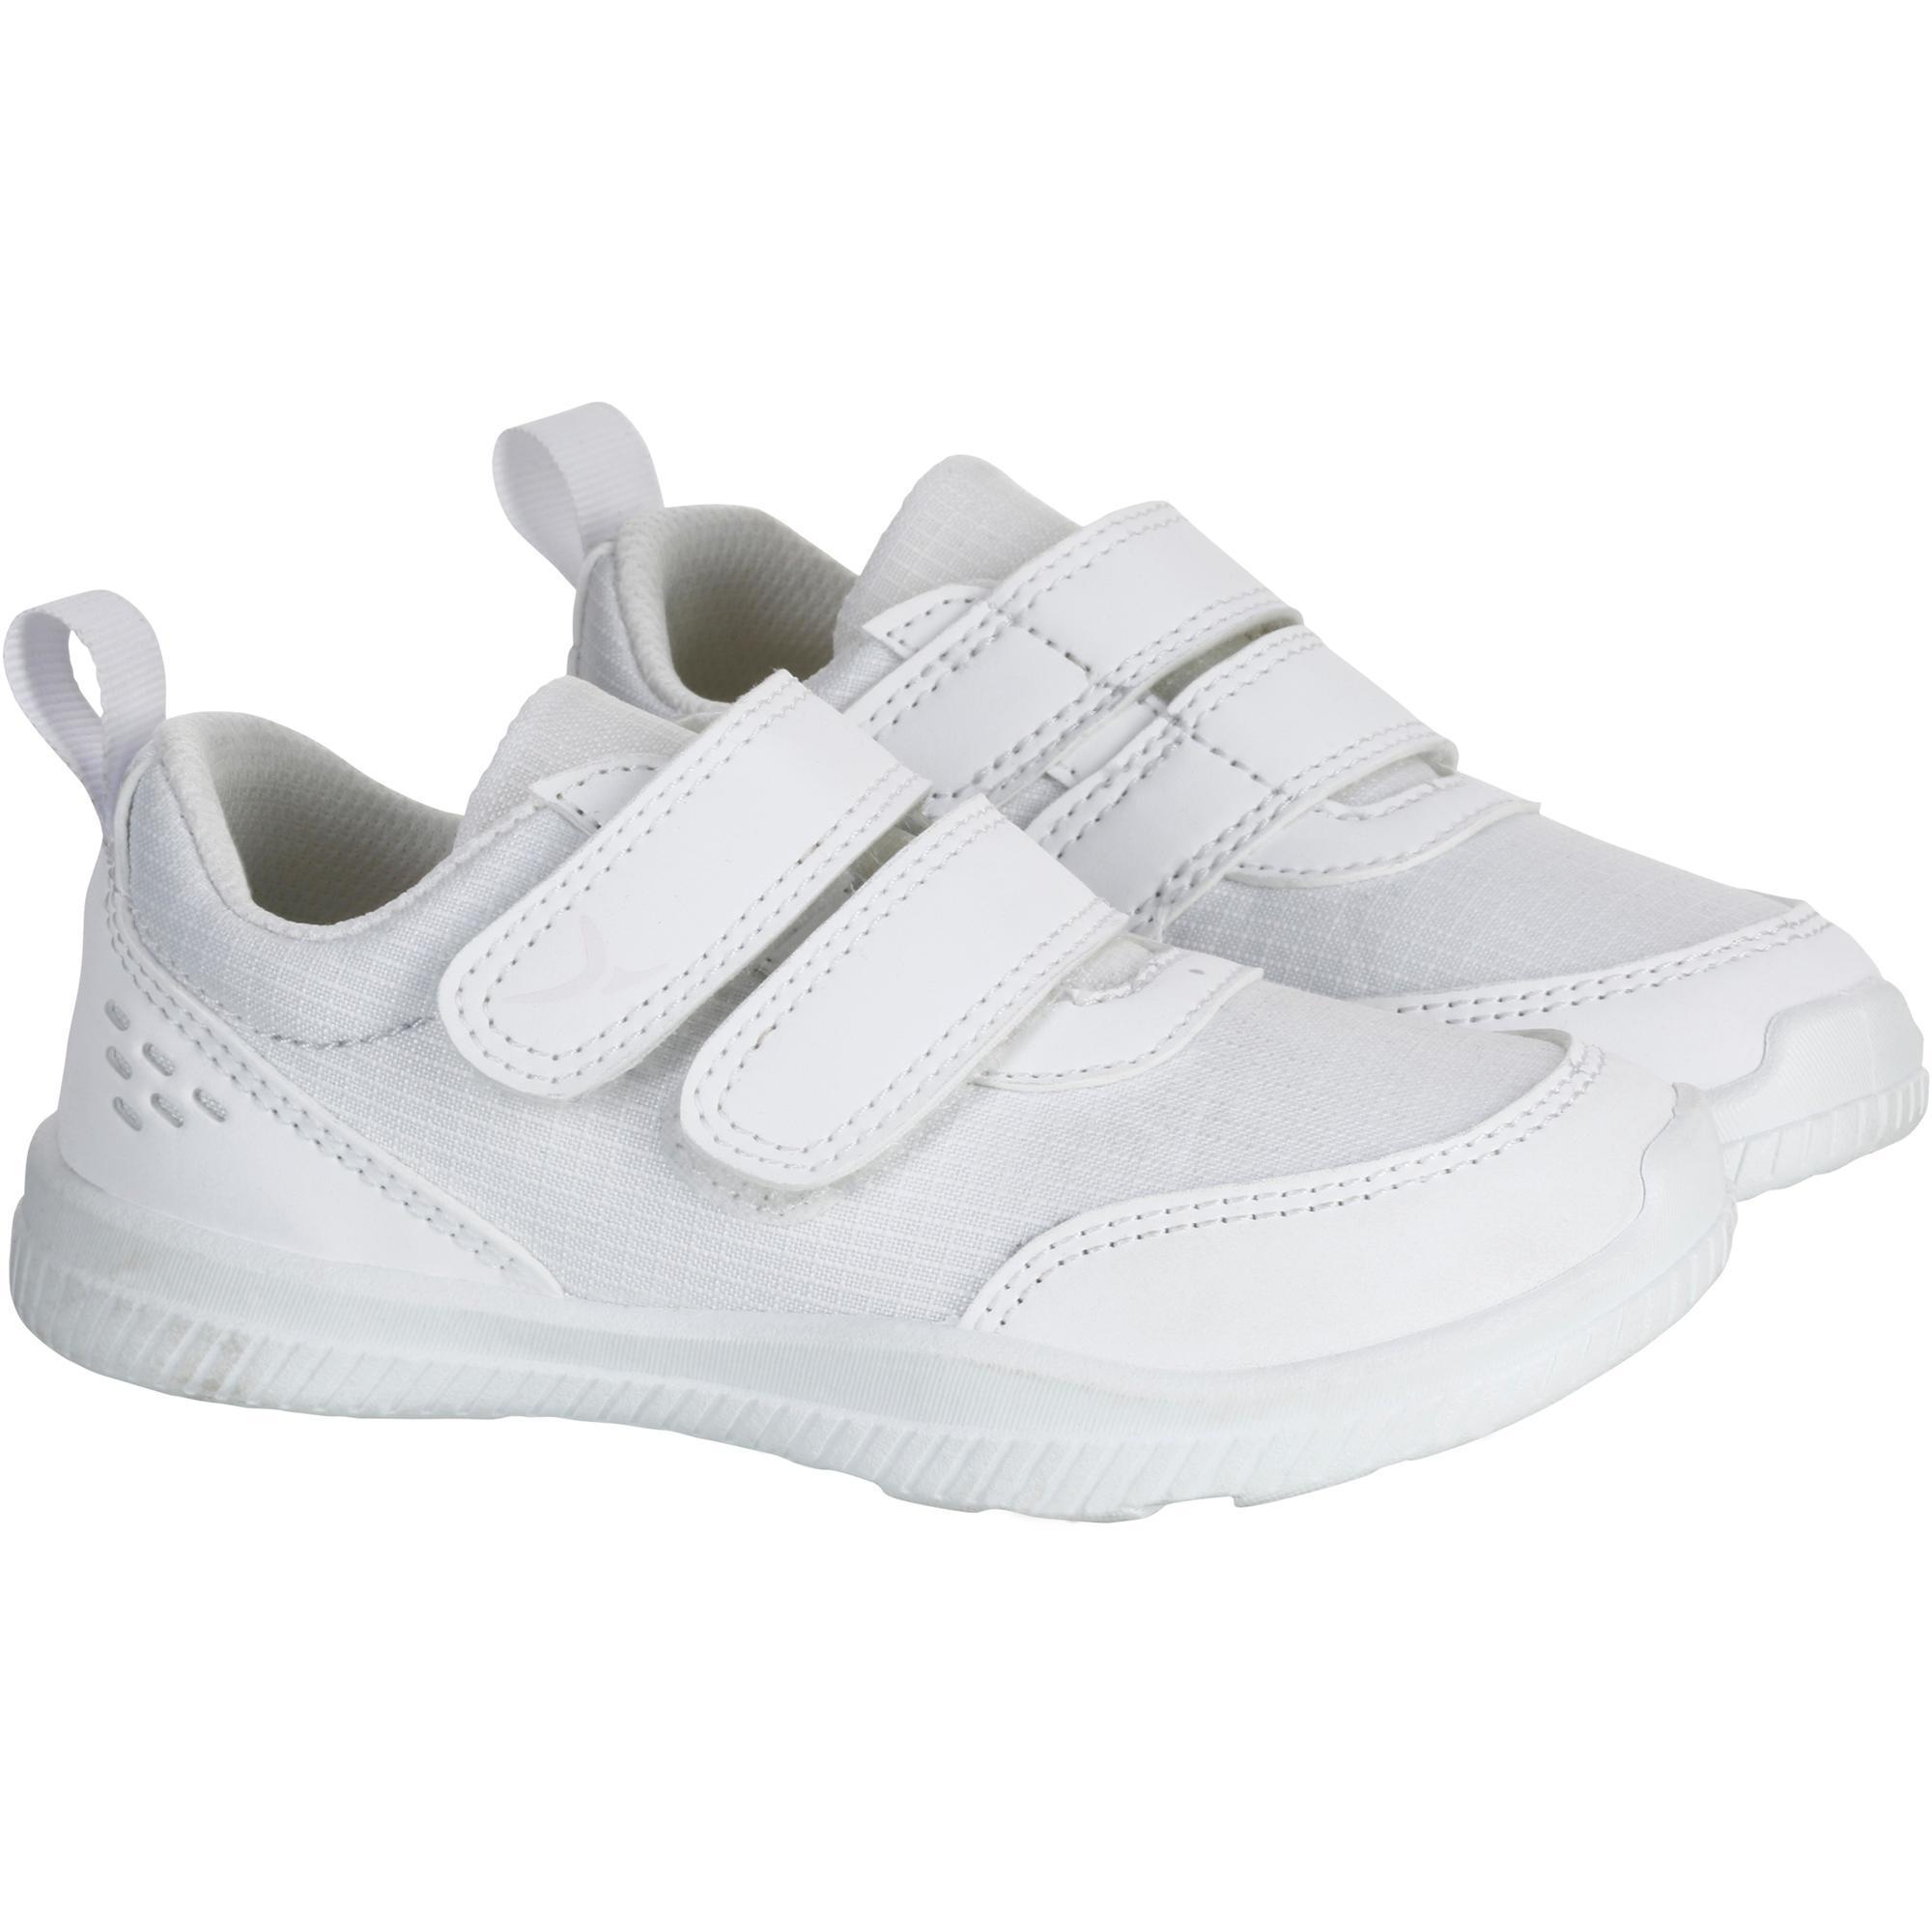 white athletic shoes